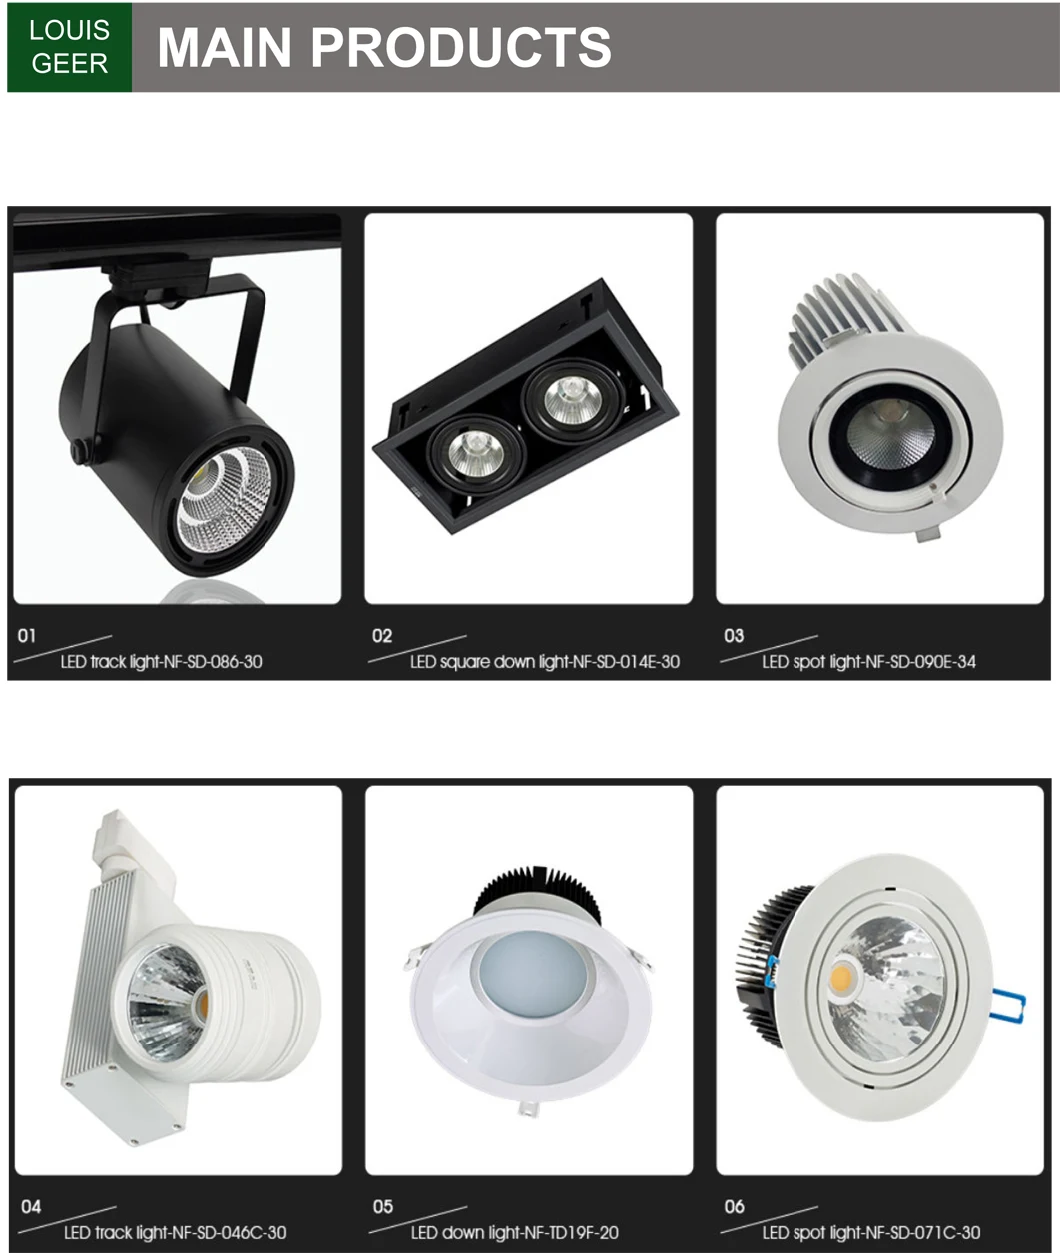 Professional Manufacturer 25W Innovative Surface Mounting Track LED Track Light Surface Mounted LED Track Spot Light